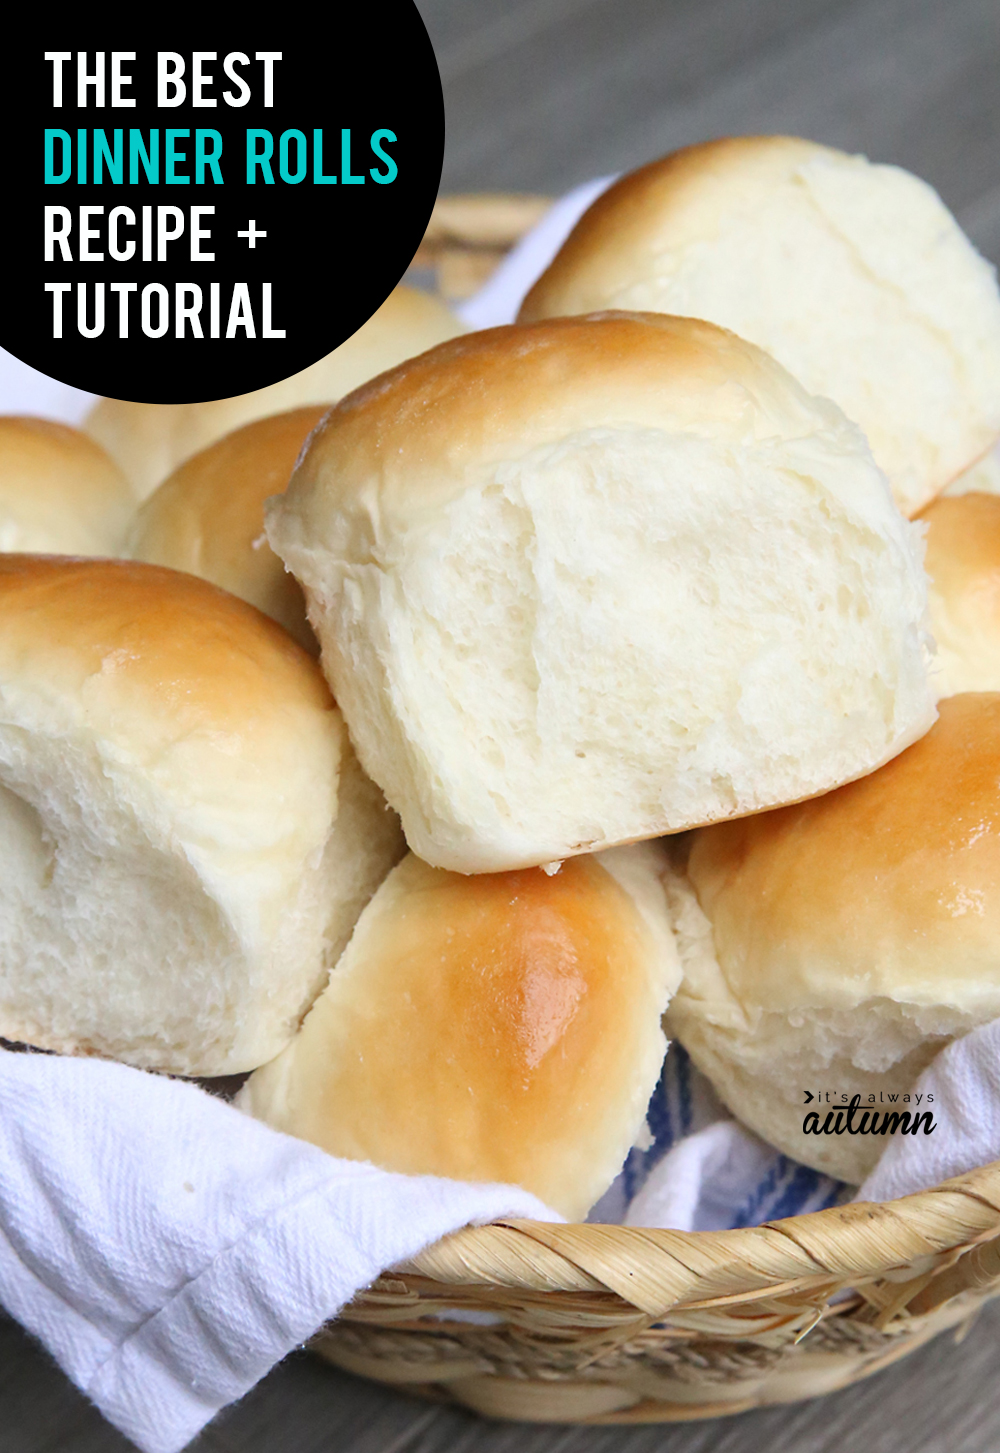 This is THE BEST dinner rolls recipe! Click through for the recipe and video instructions.